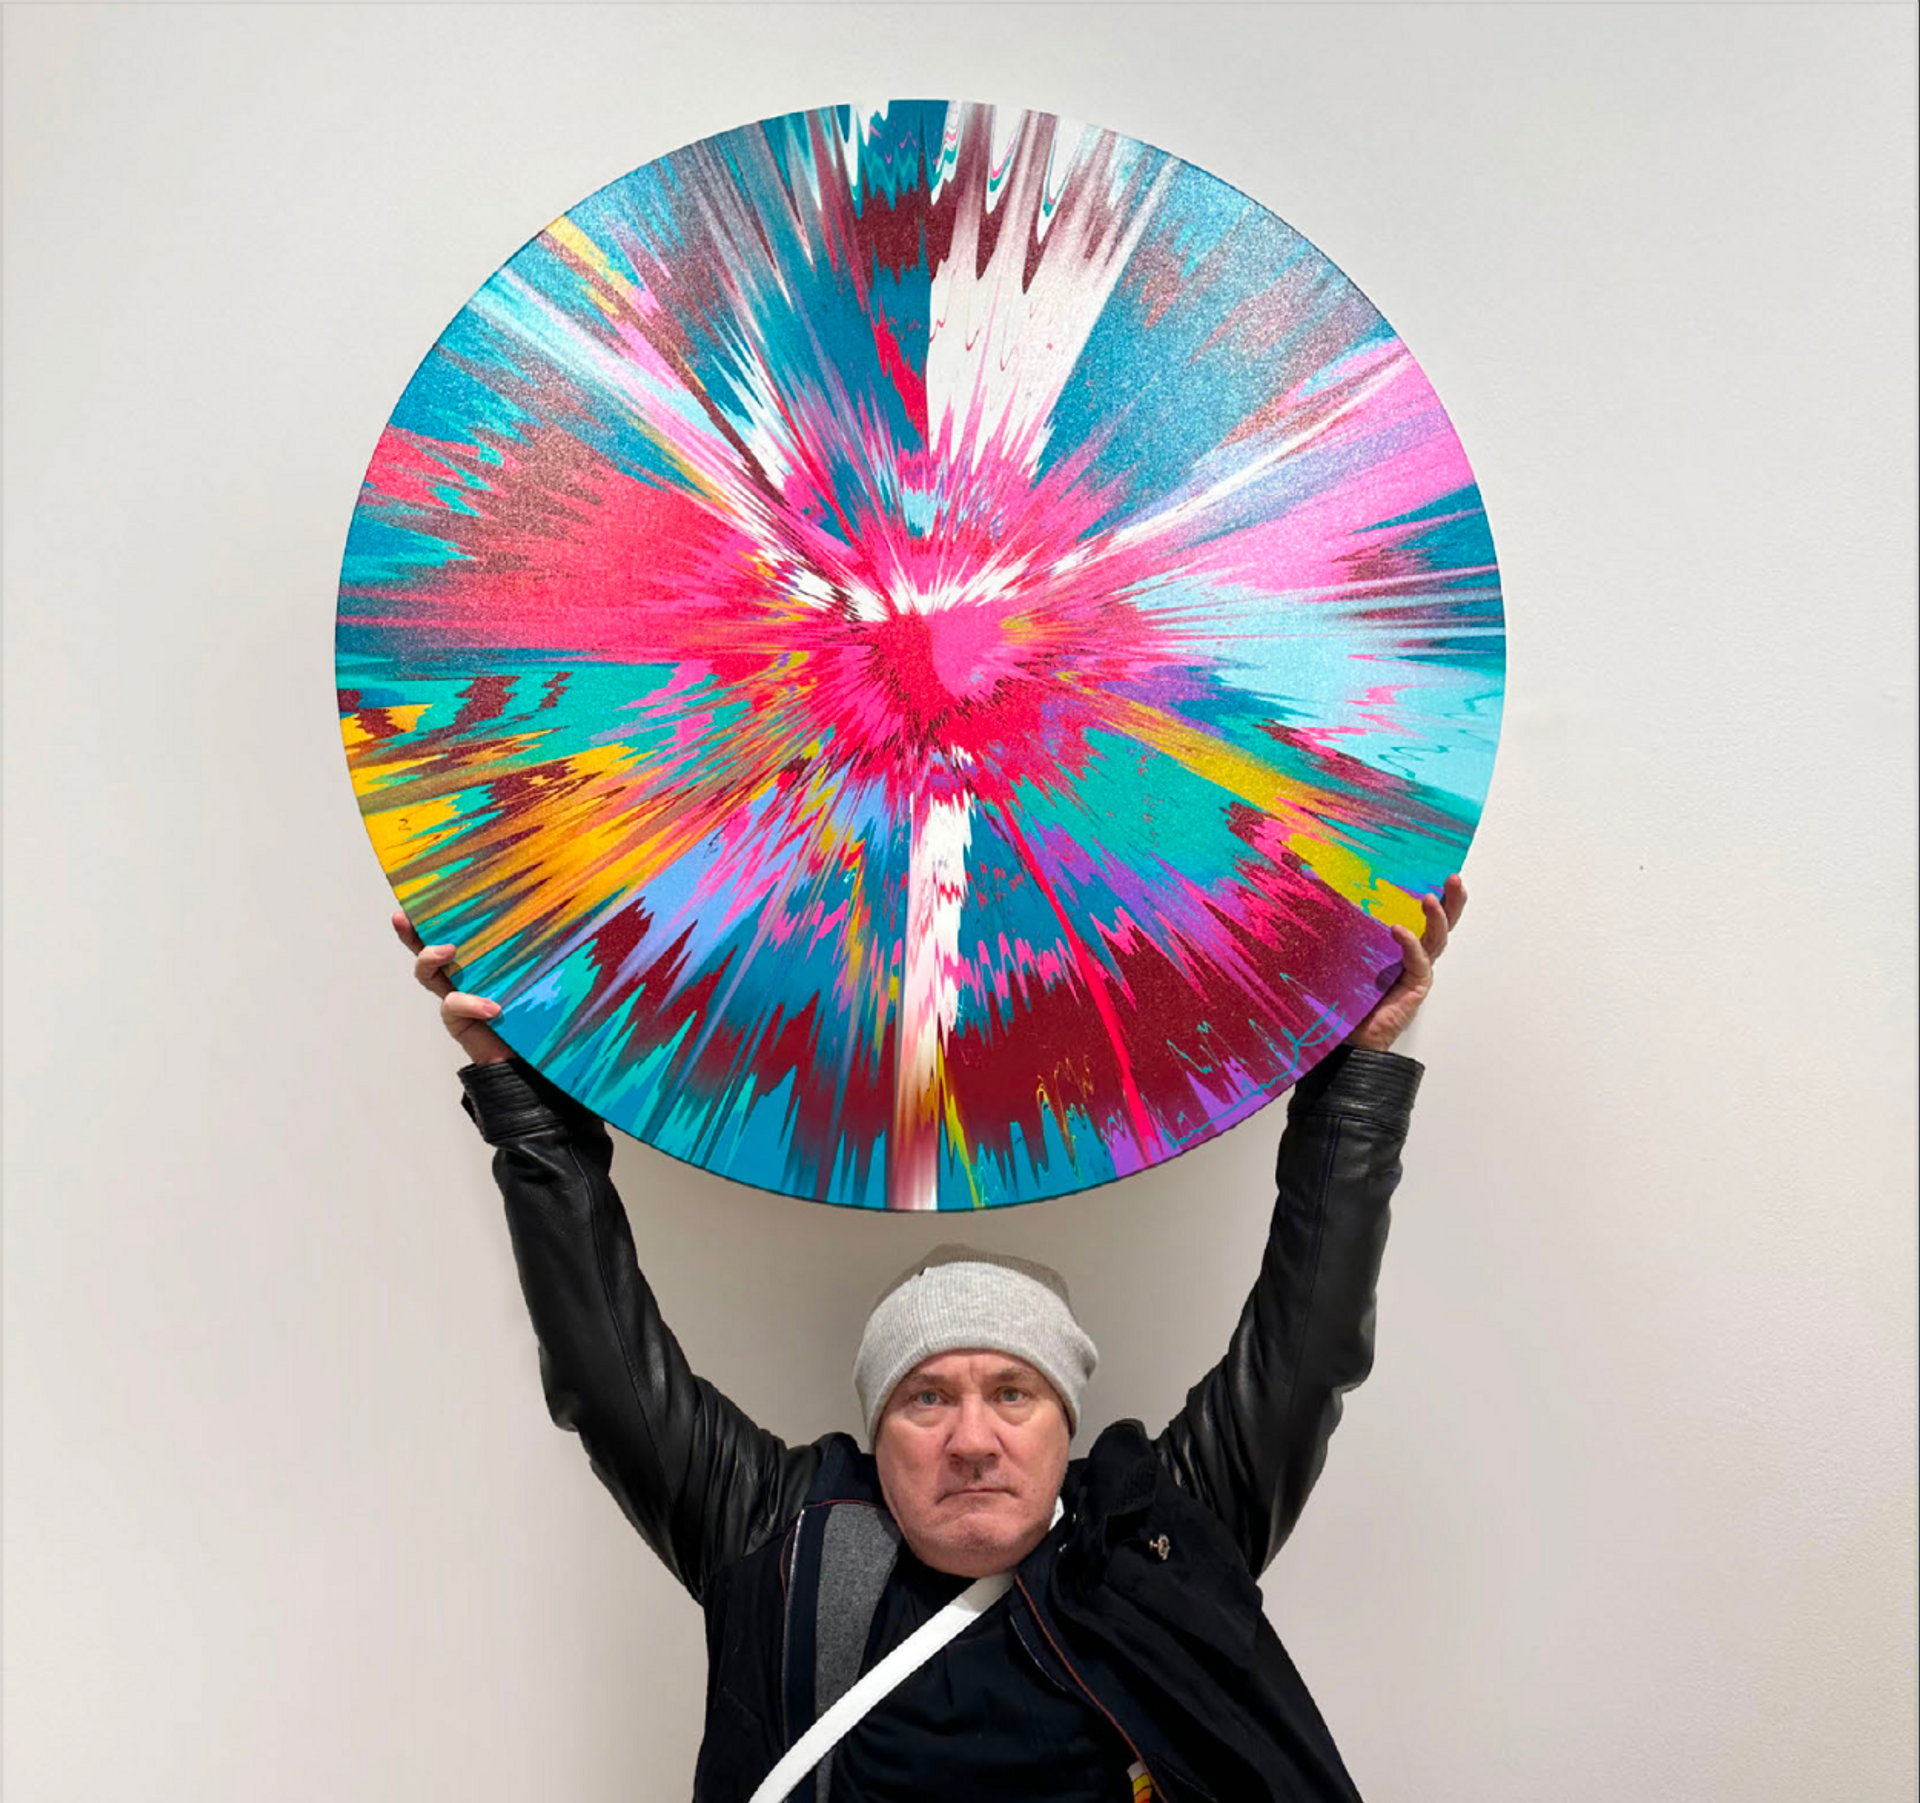 Damien Hirst holding a circle-shaped multicolor artwork